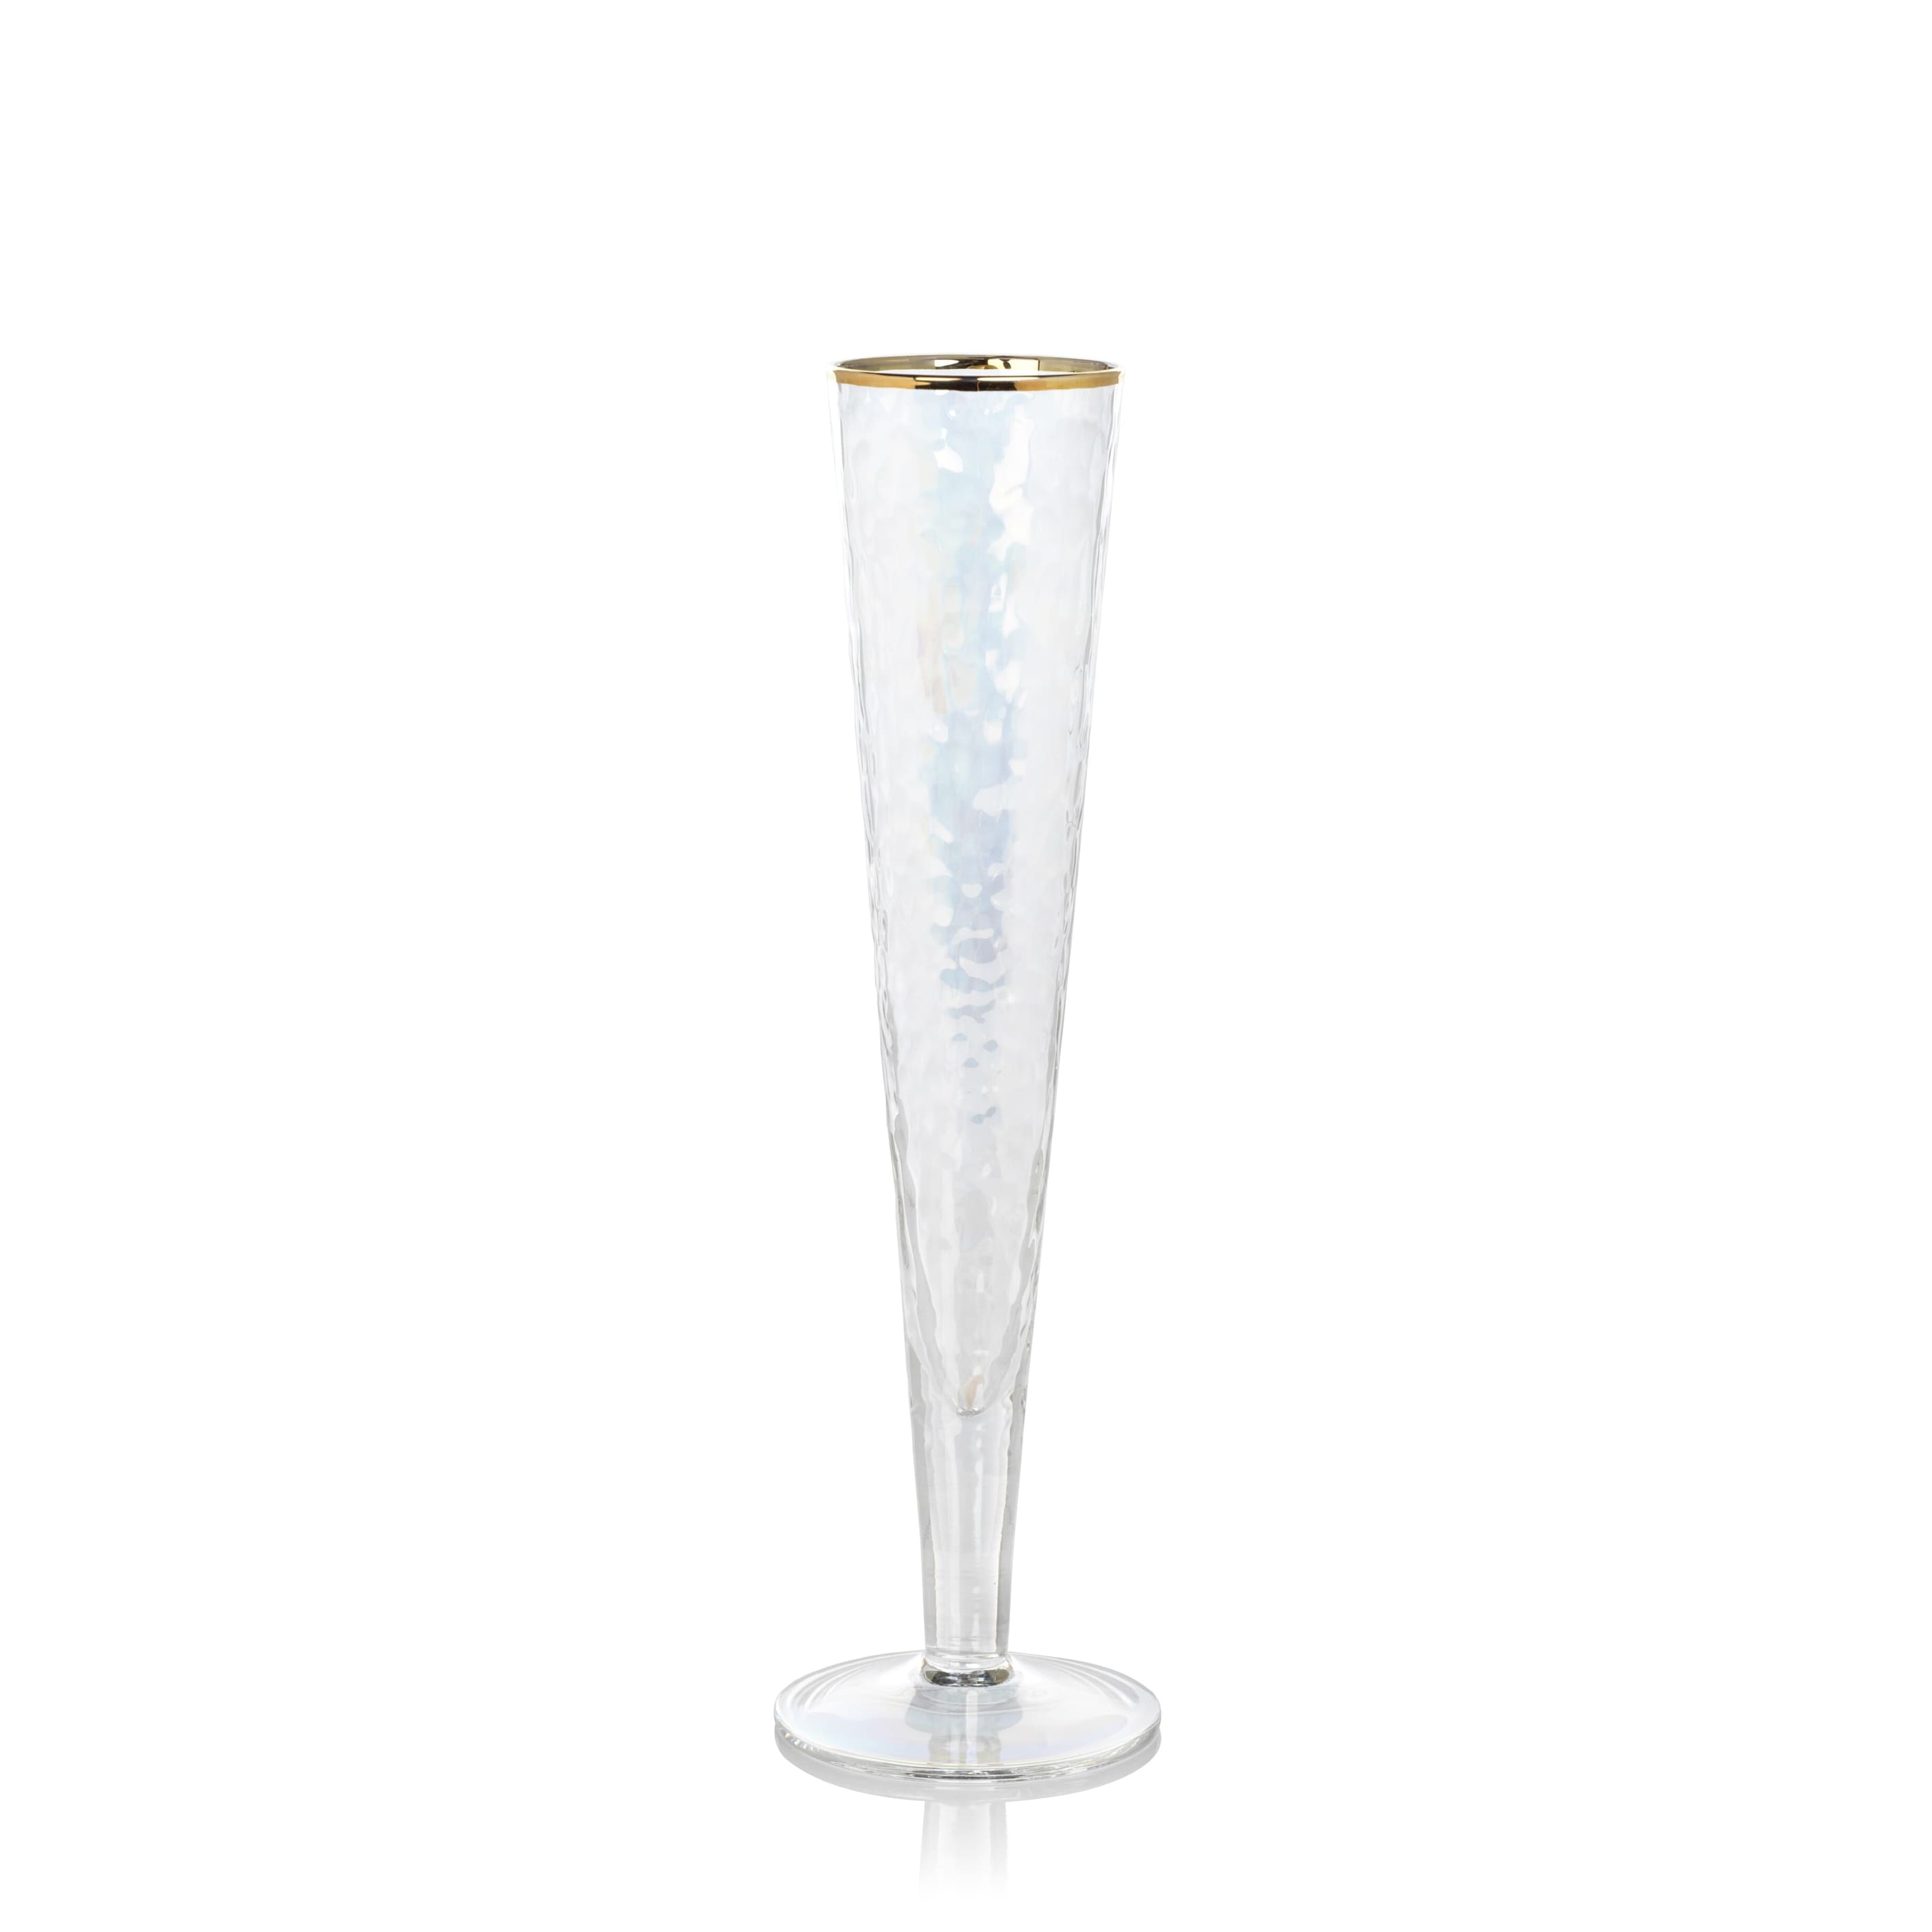 https://ak1.ostkcdn.com/images/products/is/images/direct/be9769d5f37e9b043fa61ae3b5189f471b49eb4e/Kampari-Slim-Champagne-Flutes-with-Gold-Rim%2C-Set-of-4.jpg